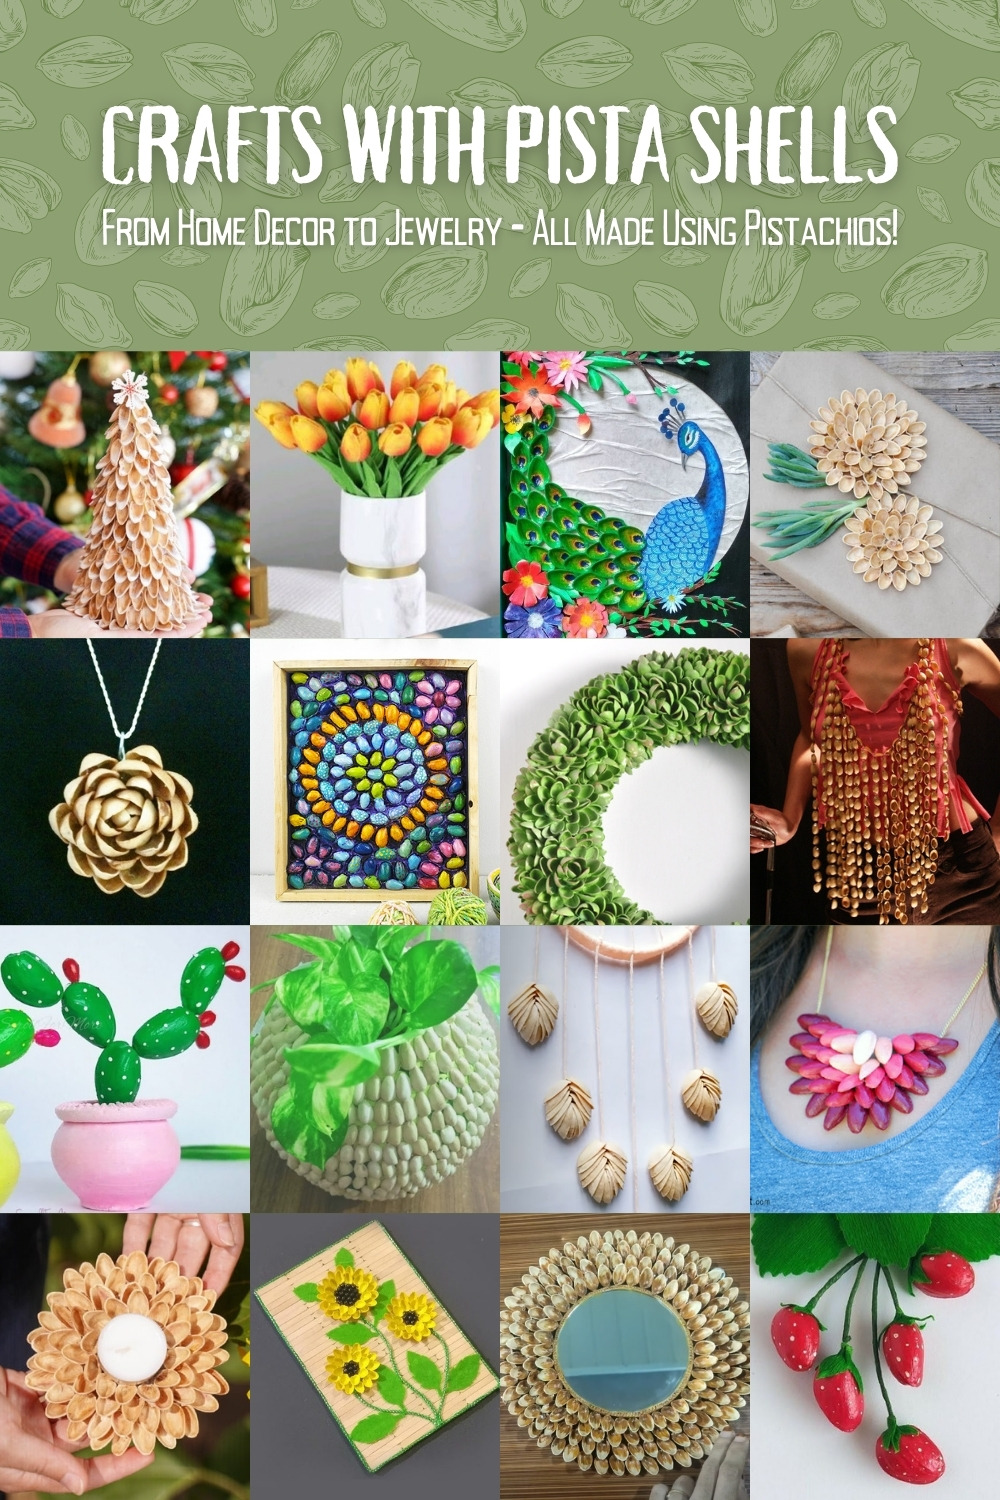 Crafts with Pista Shells